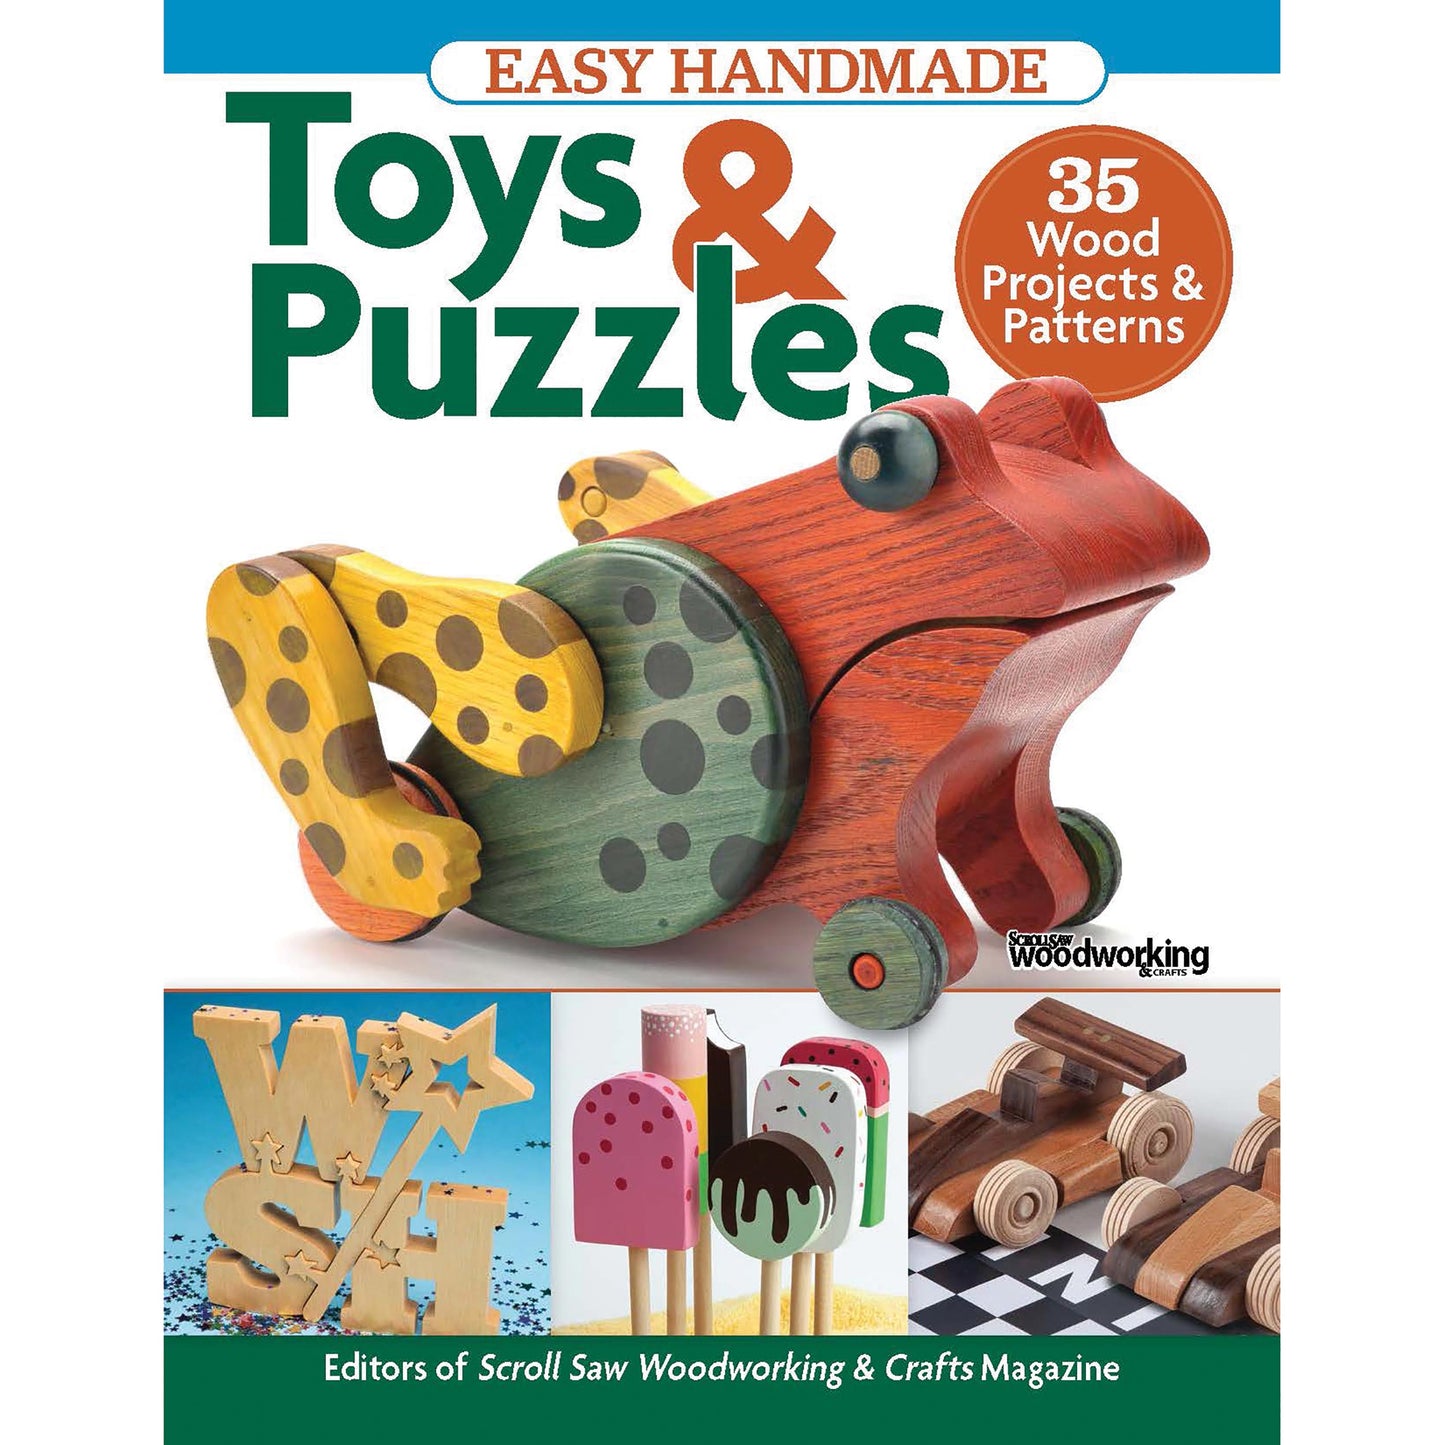 Handmade Toys & Puzzles: 35 Projects & Patterns alt 0